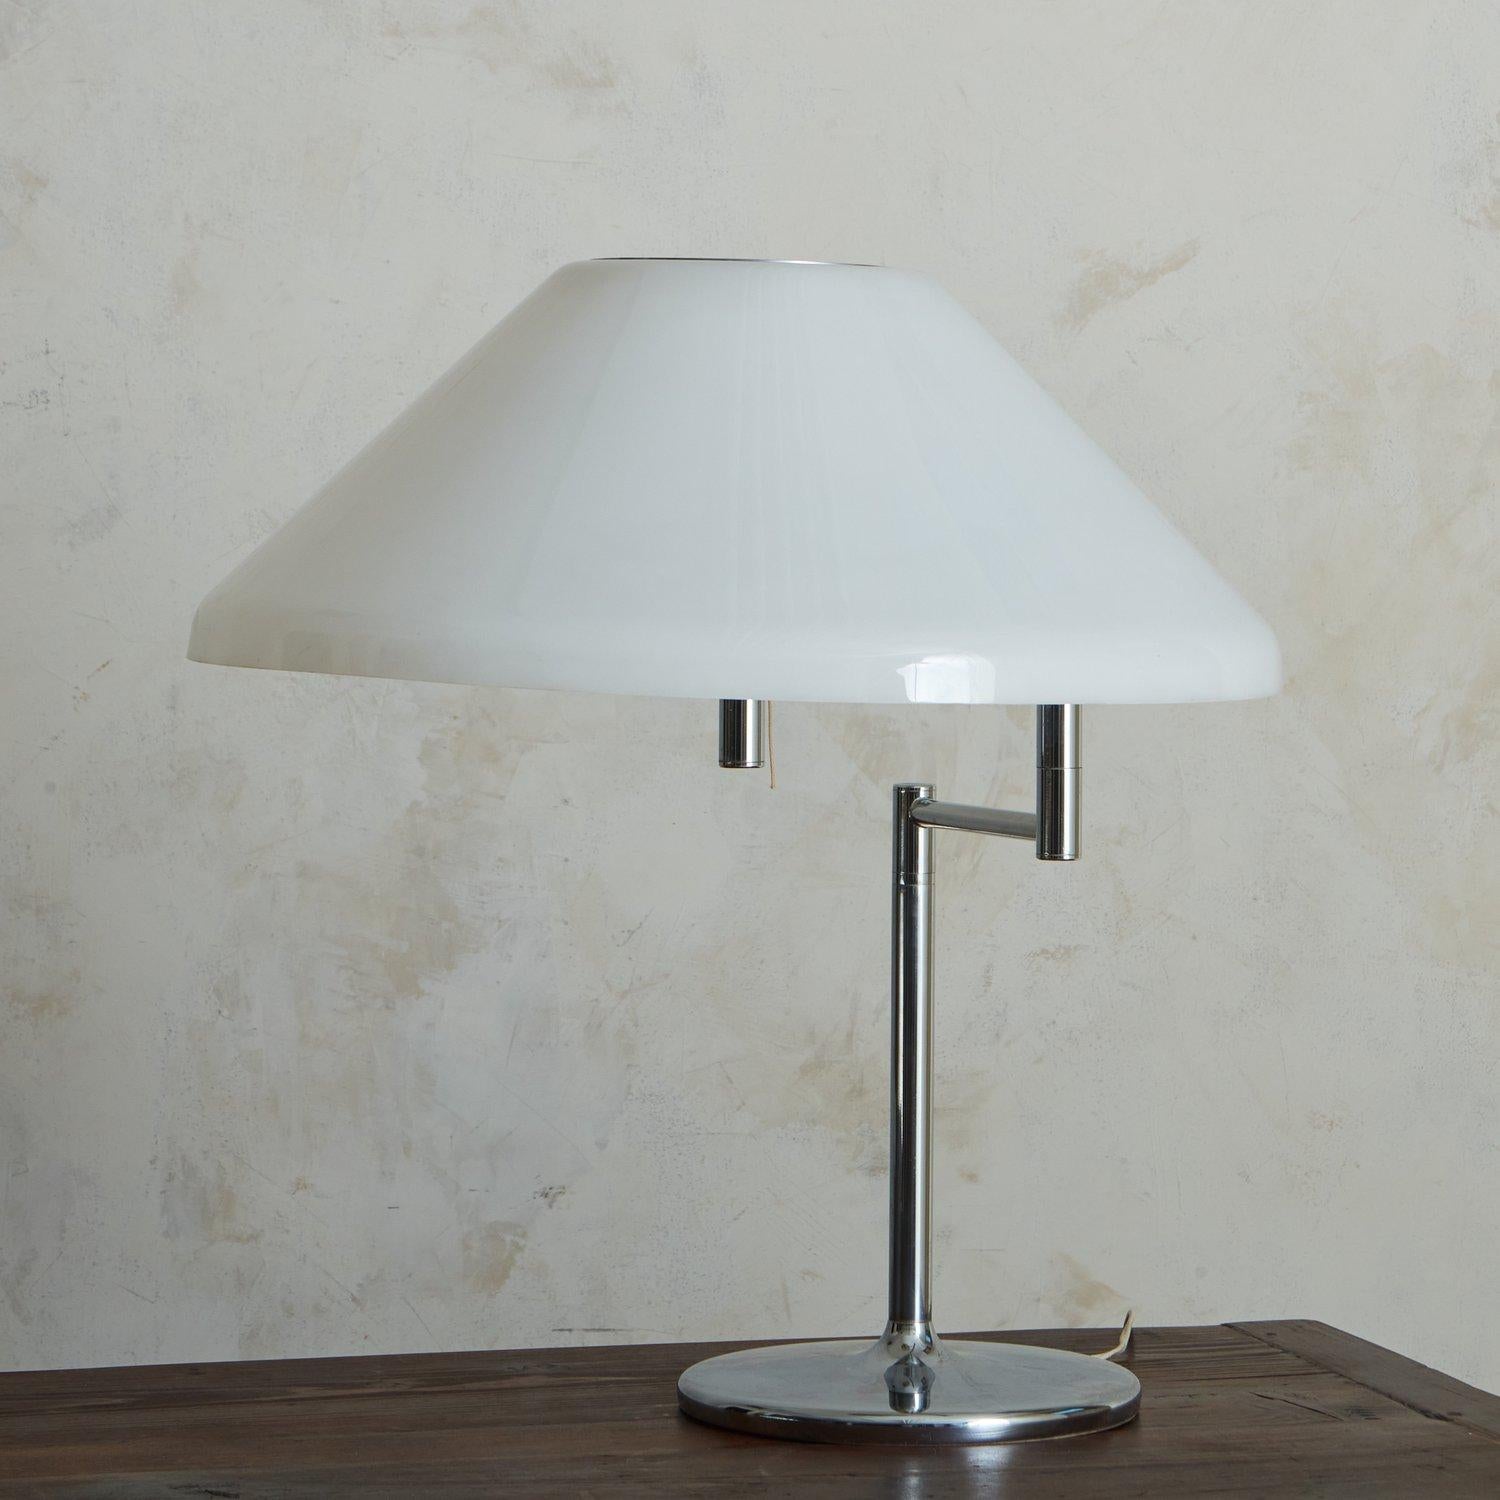 A 1960s table lamp attributed to Swiss Lamps International. This lamp features a chrome frame with a circular base and a pivoting arm, which supports a white acrylic shade. Unmarked. Sourced in France, 1960s. 

DIMENSIONS: 10